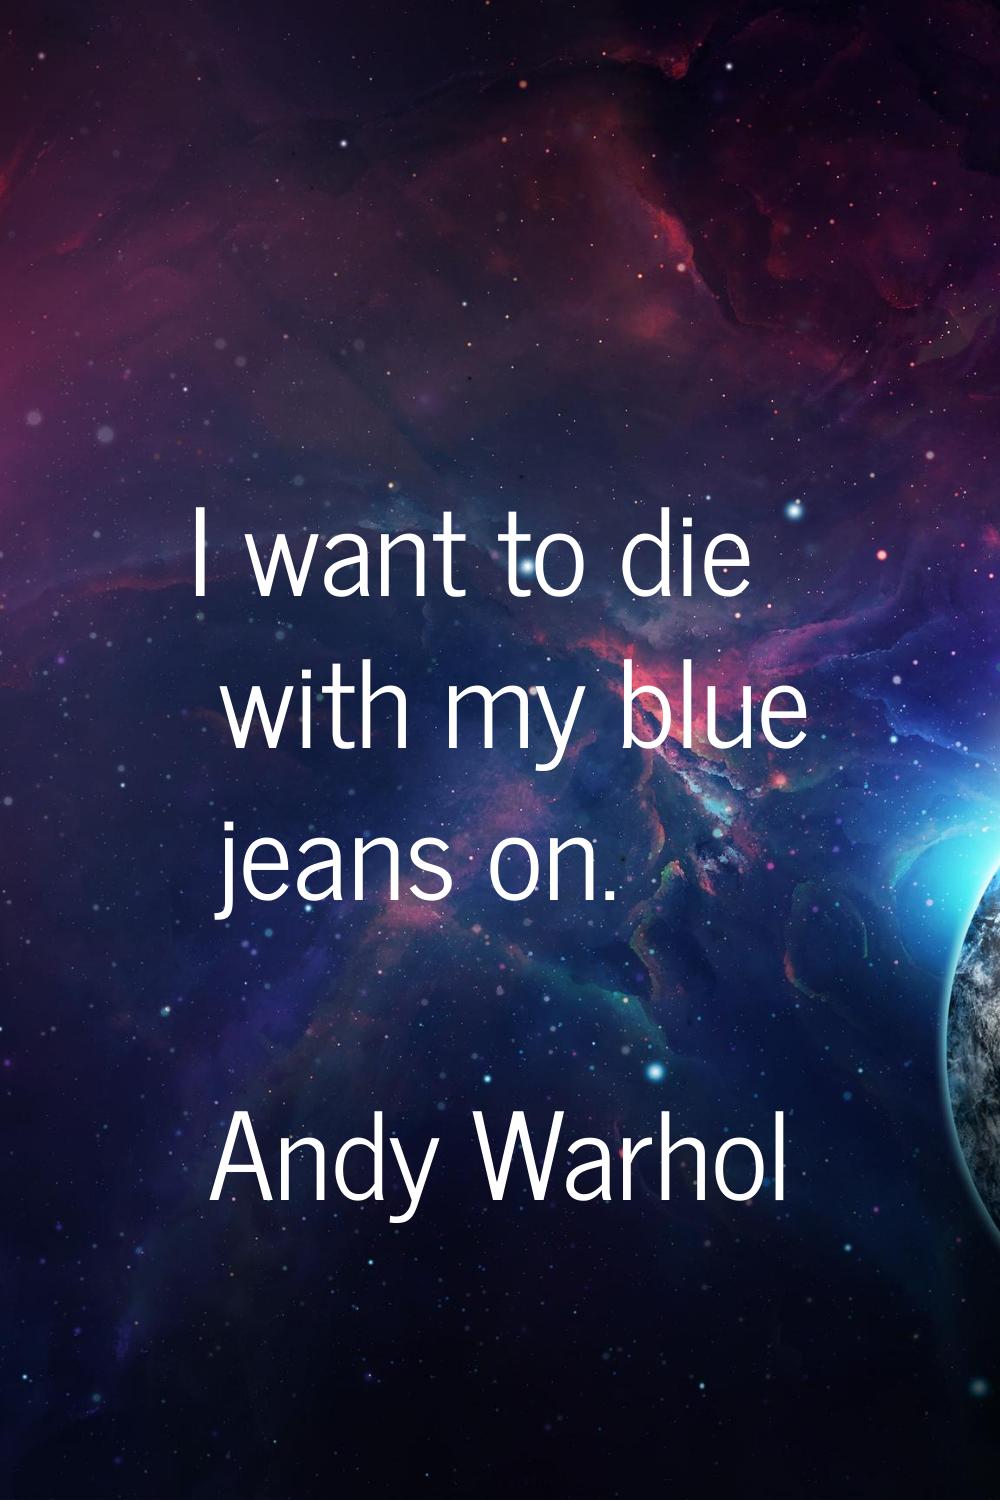 I want to die with my blue jeans on.